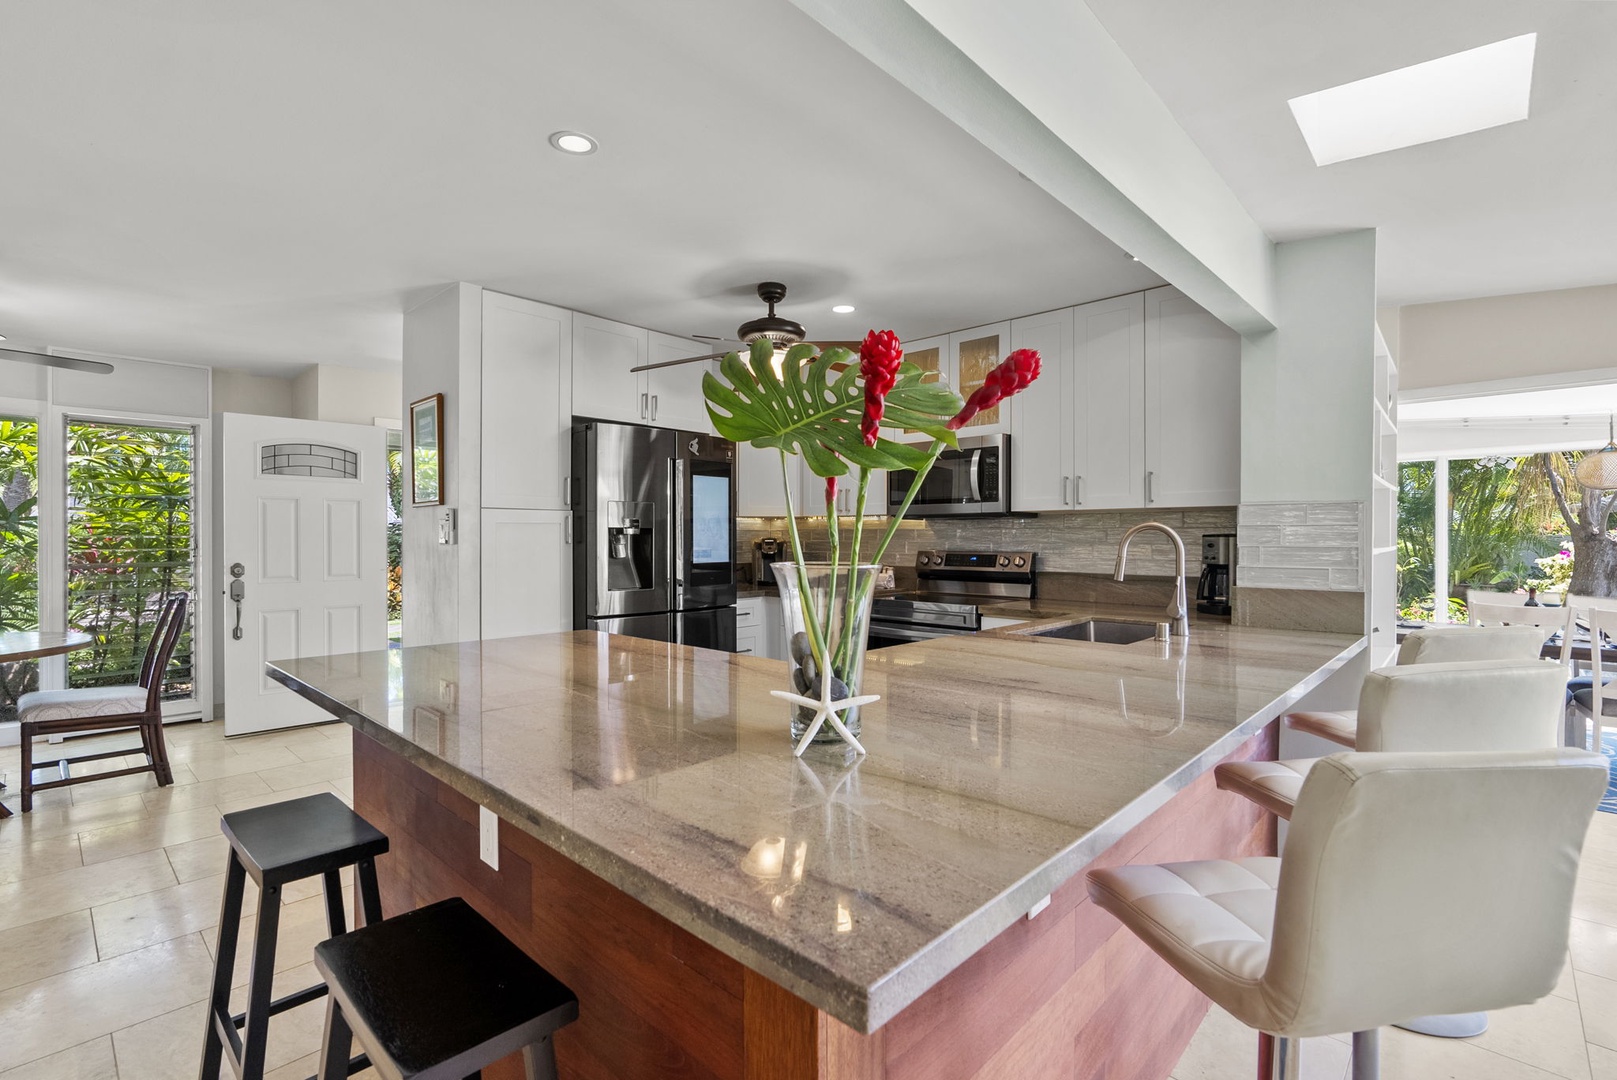 Kailua Vacation Rentals, Hale Aloha - Stylish kitchen bar - ideal for quick meals and entertaining guests.